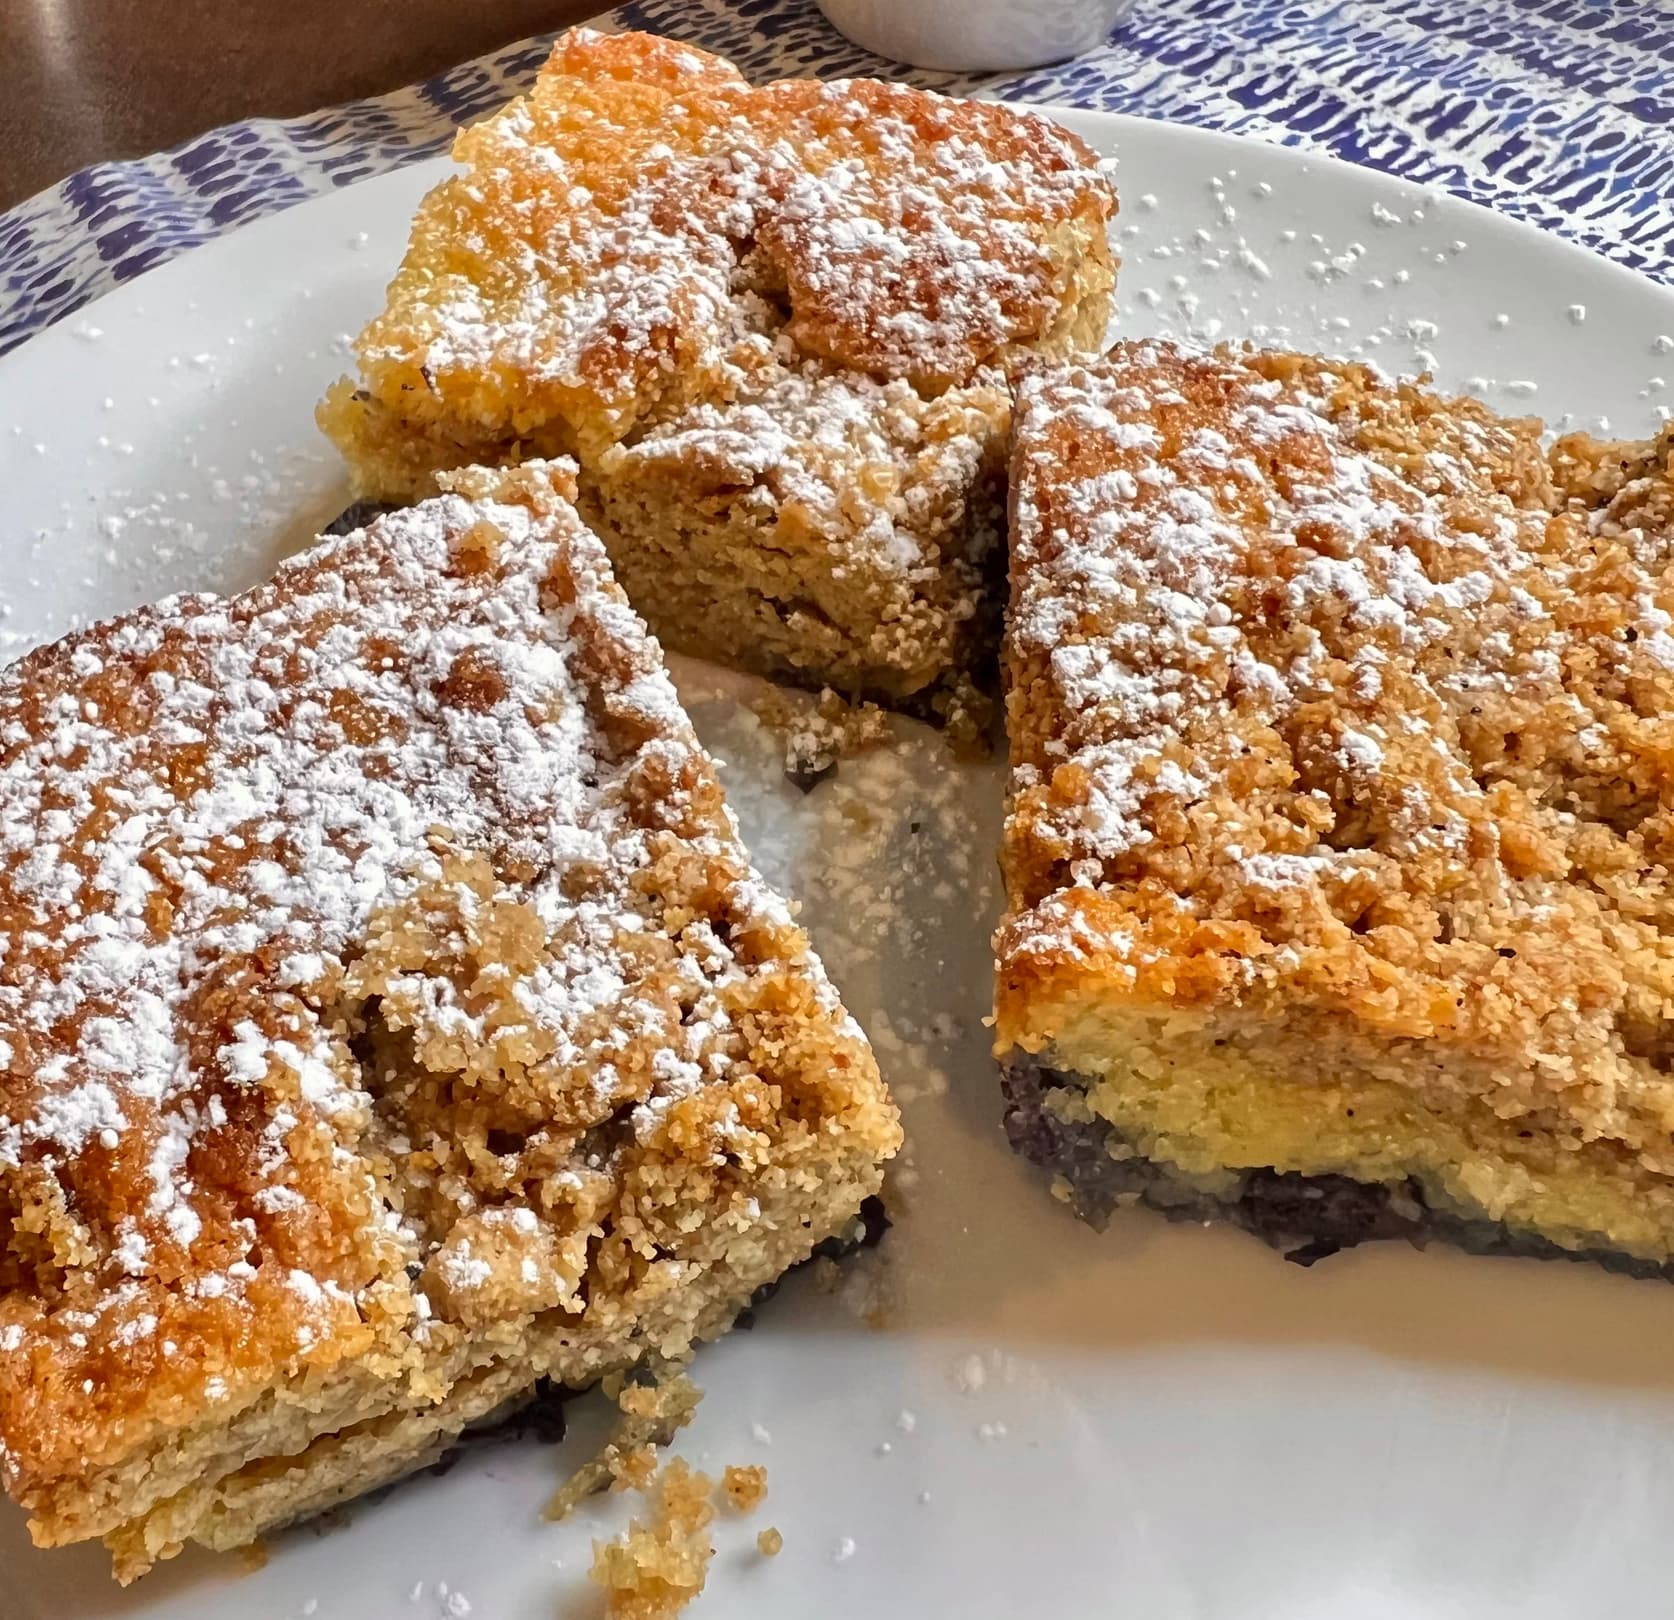 Plate full of almond blueberry coffee cake topped with powdered sugar